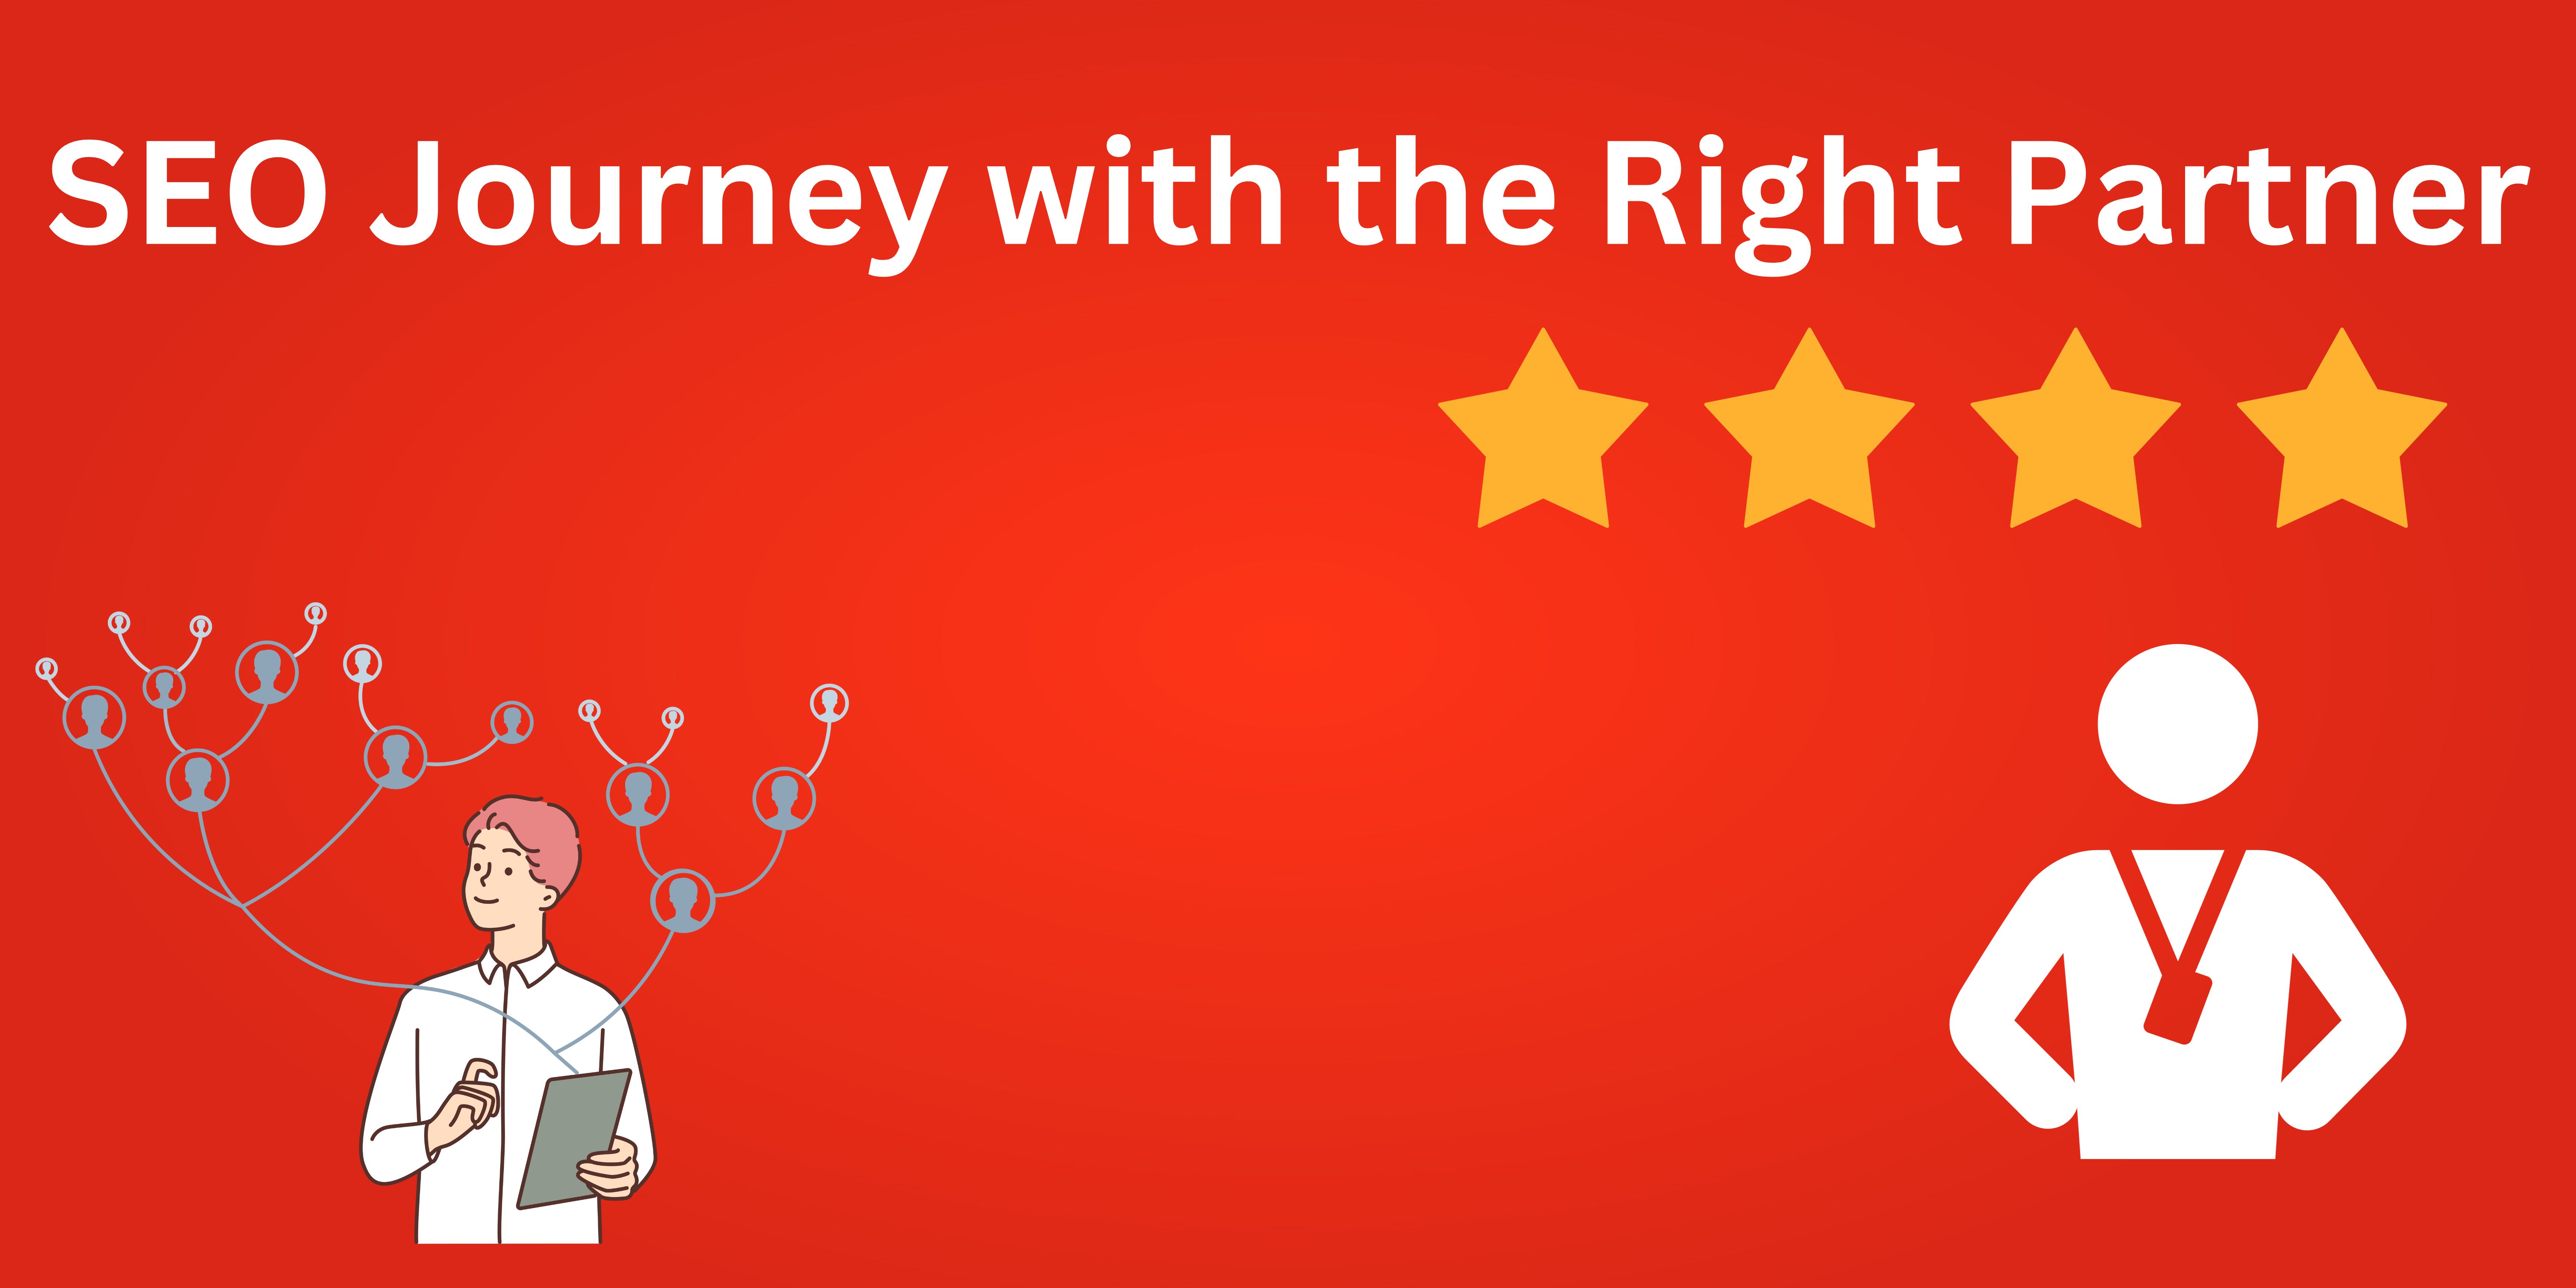 SEO Journey with the Right Partner